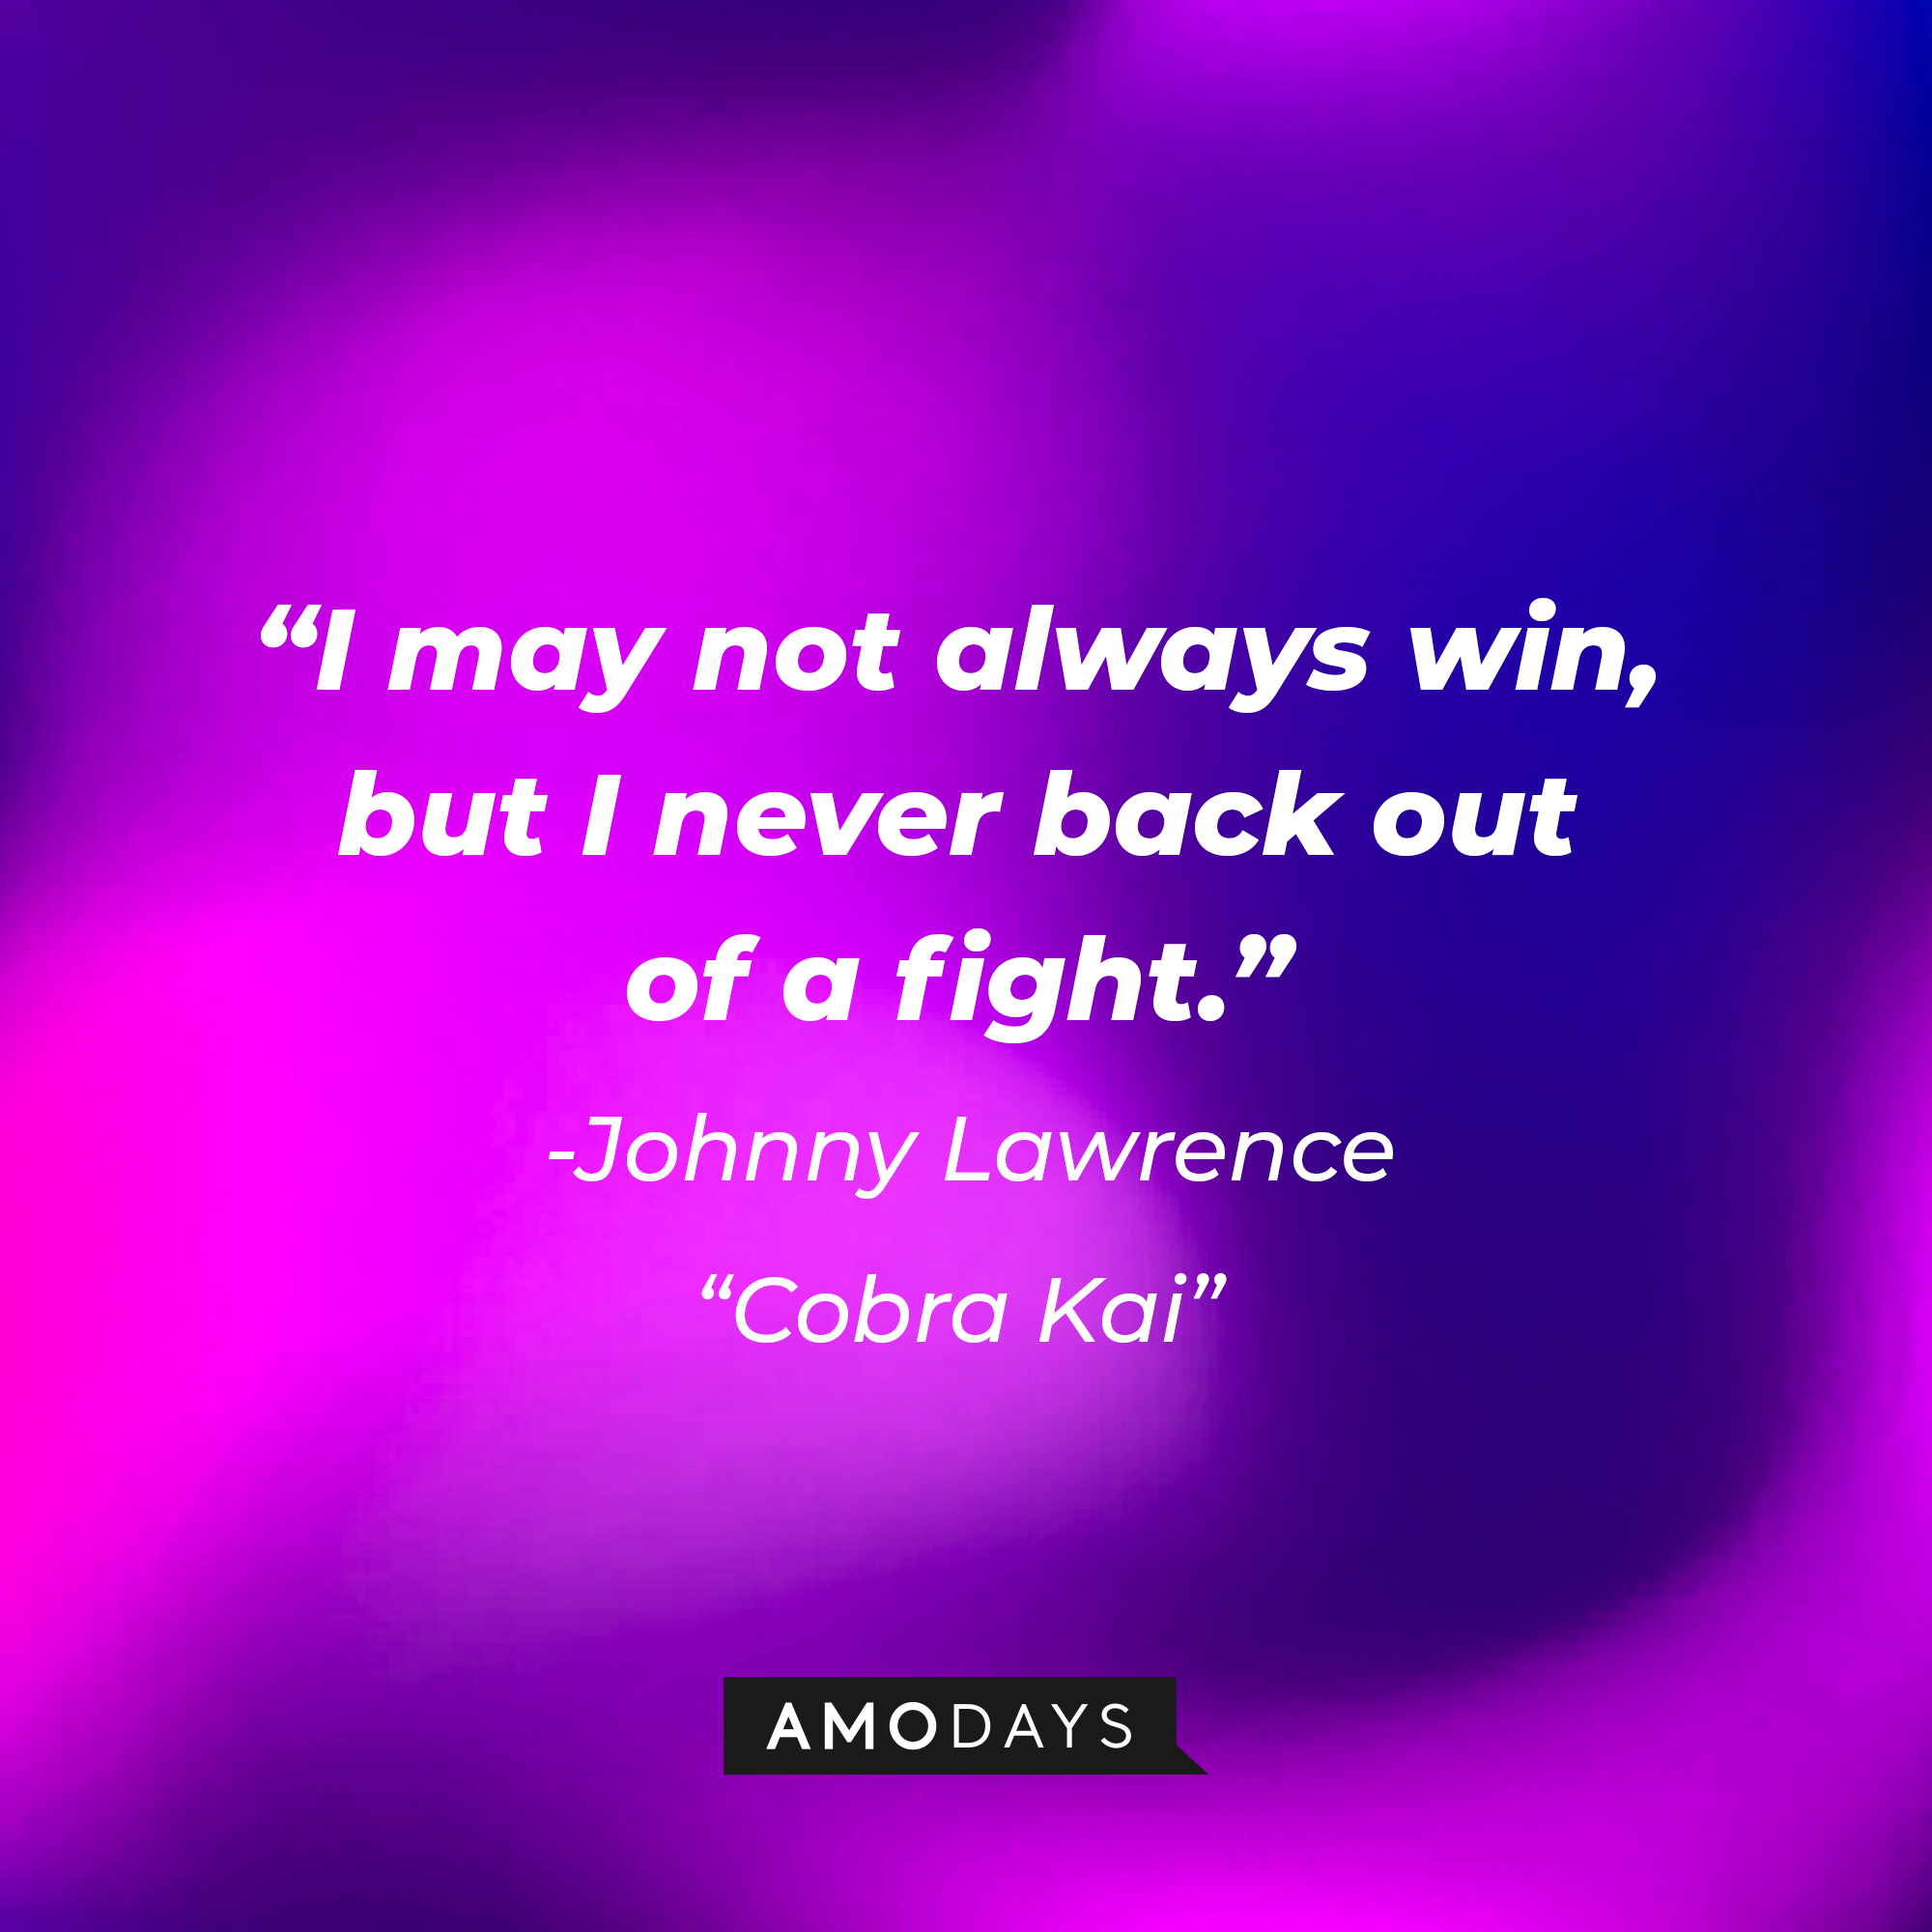 Johnny Lawrence's quote from "Cobra Kai:" “I may not always win, but I never back out of a fight.” | Source: AmoDays